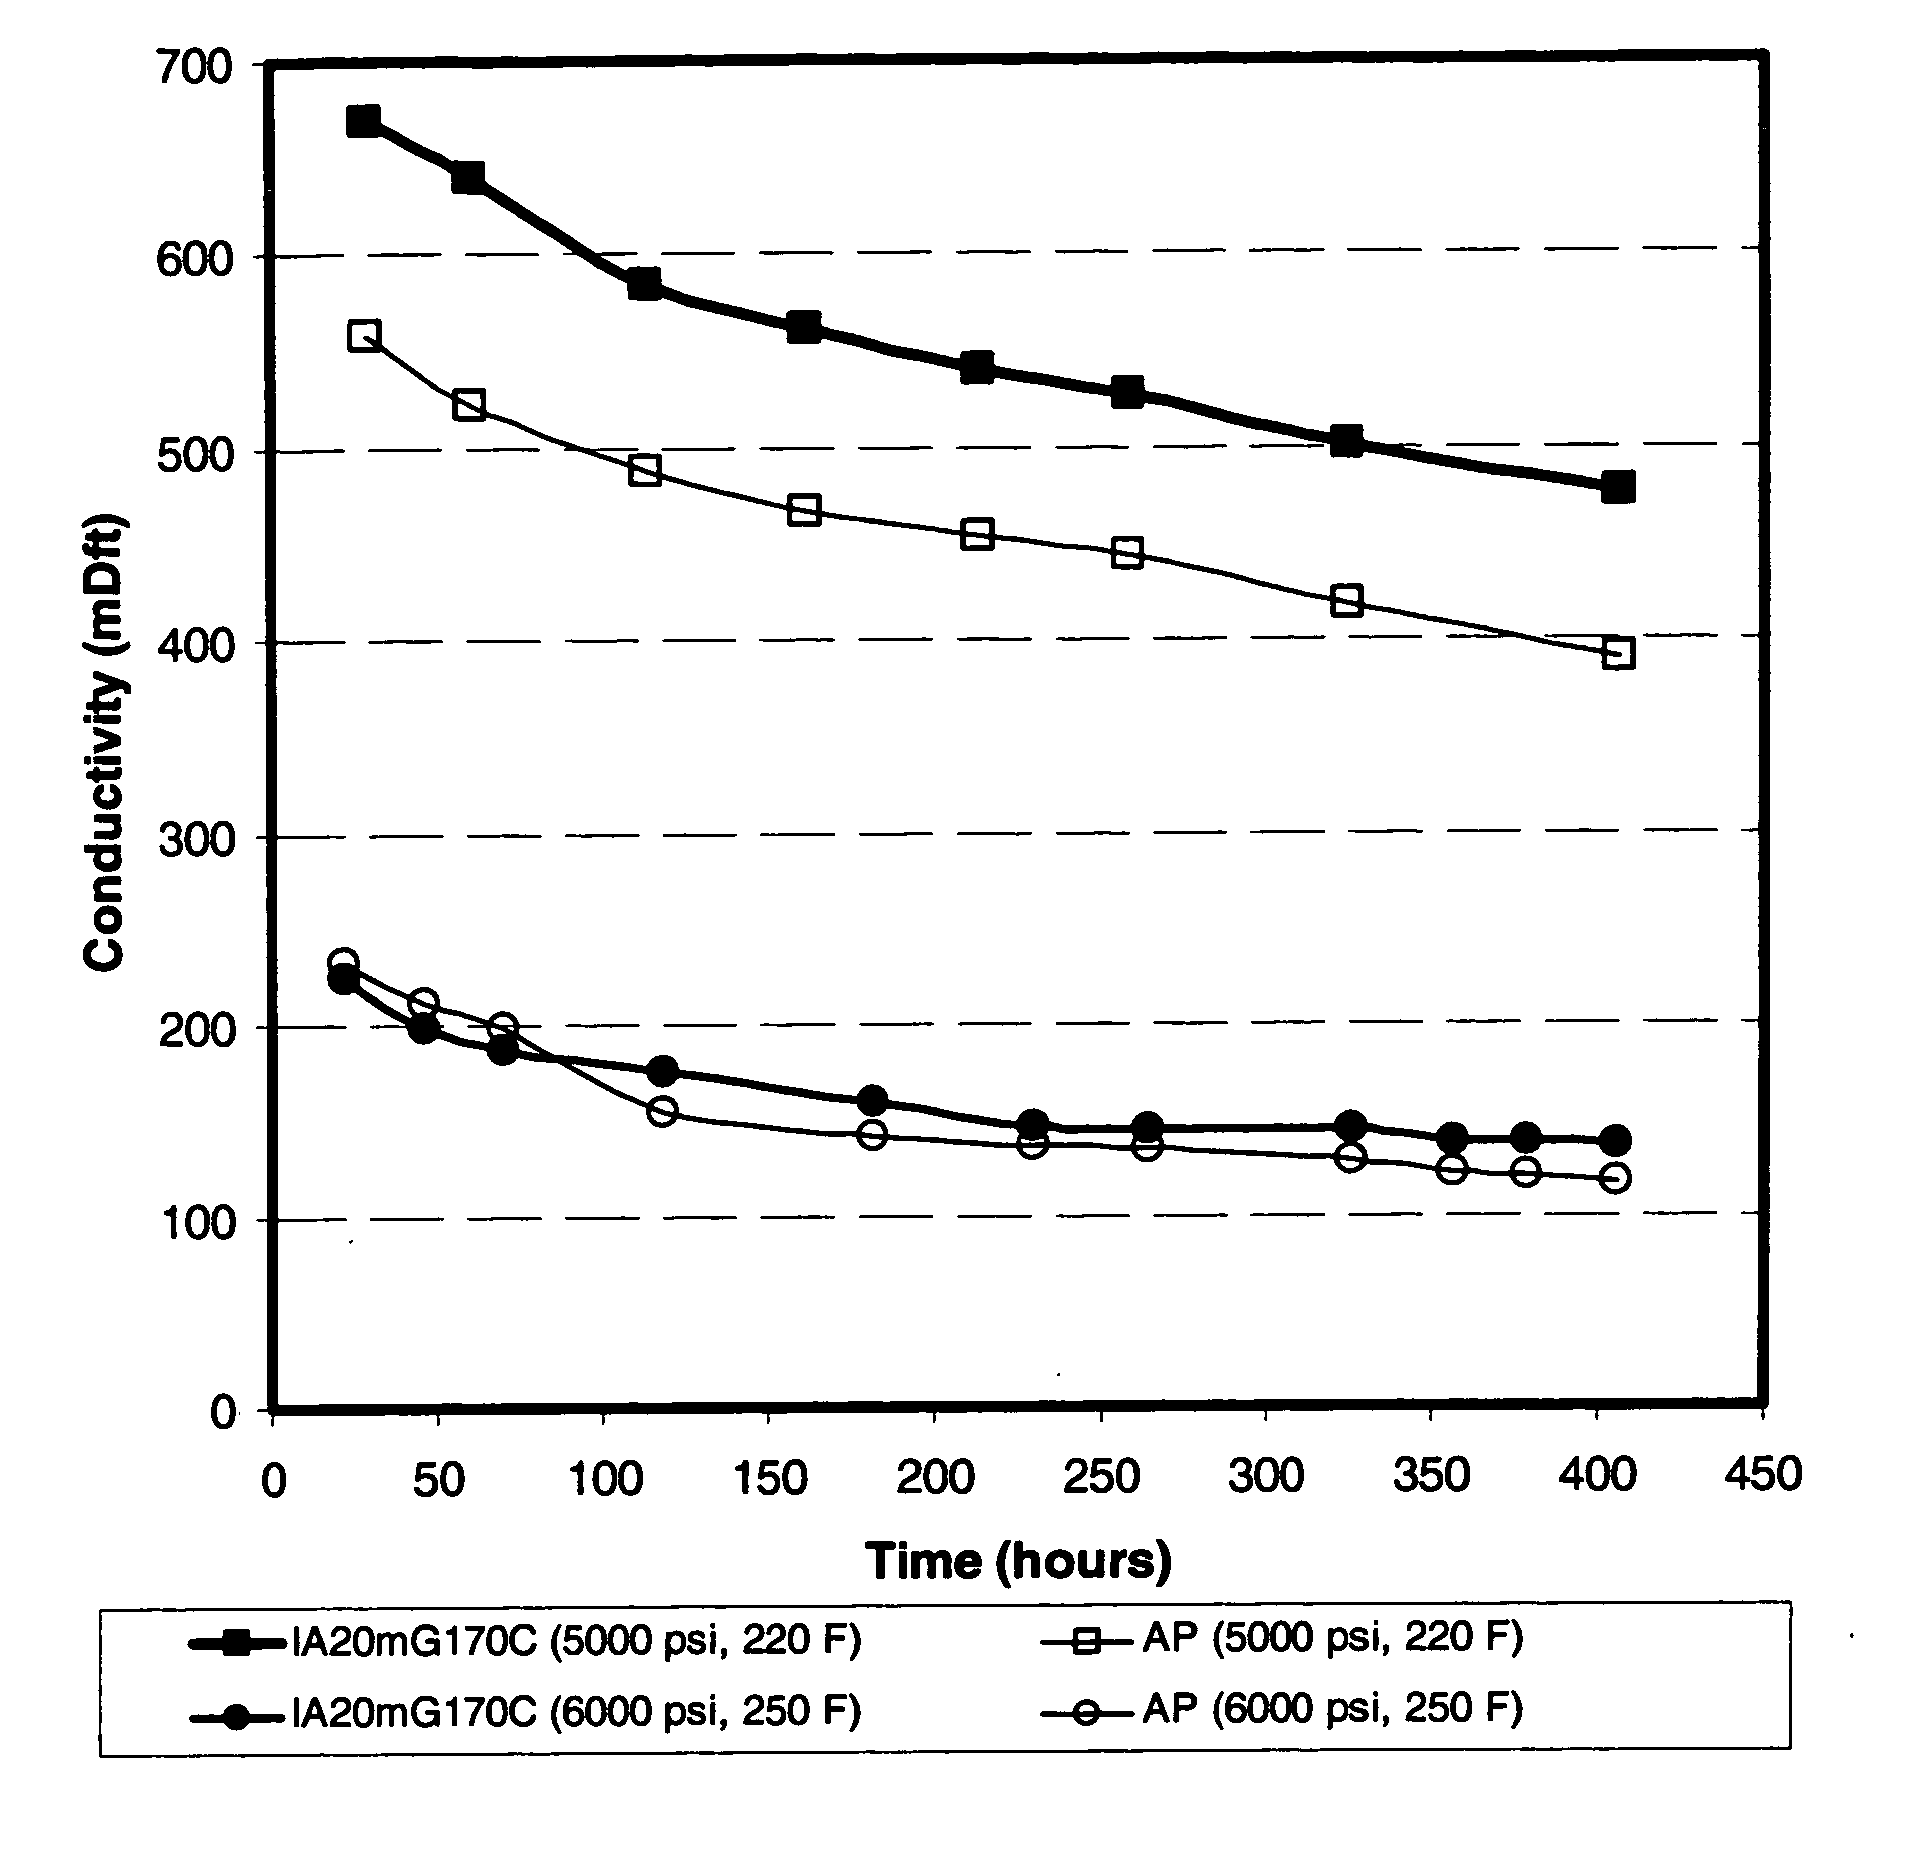 Thermoset particles with enhanced crosslinking, processing for their production, and their use in oil and natural gas driliing applications